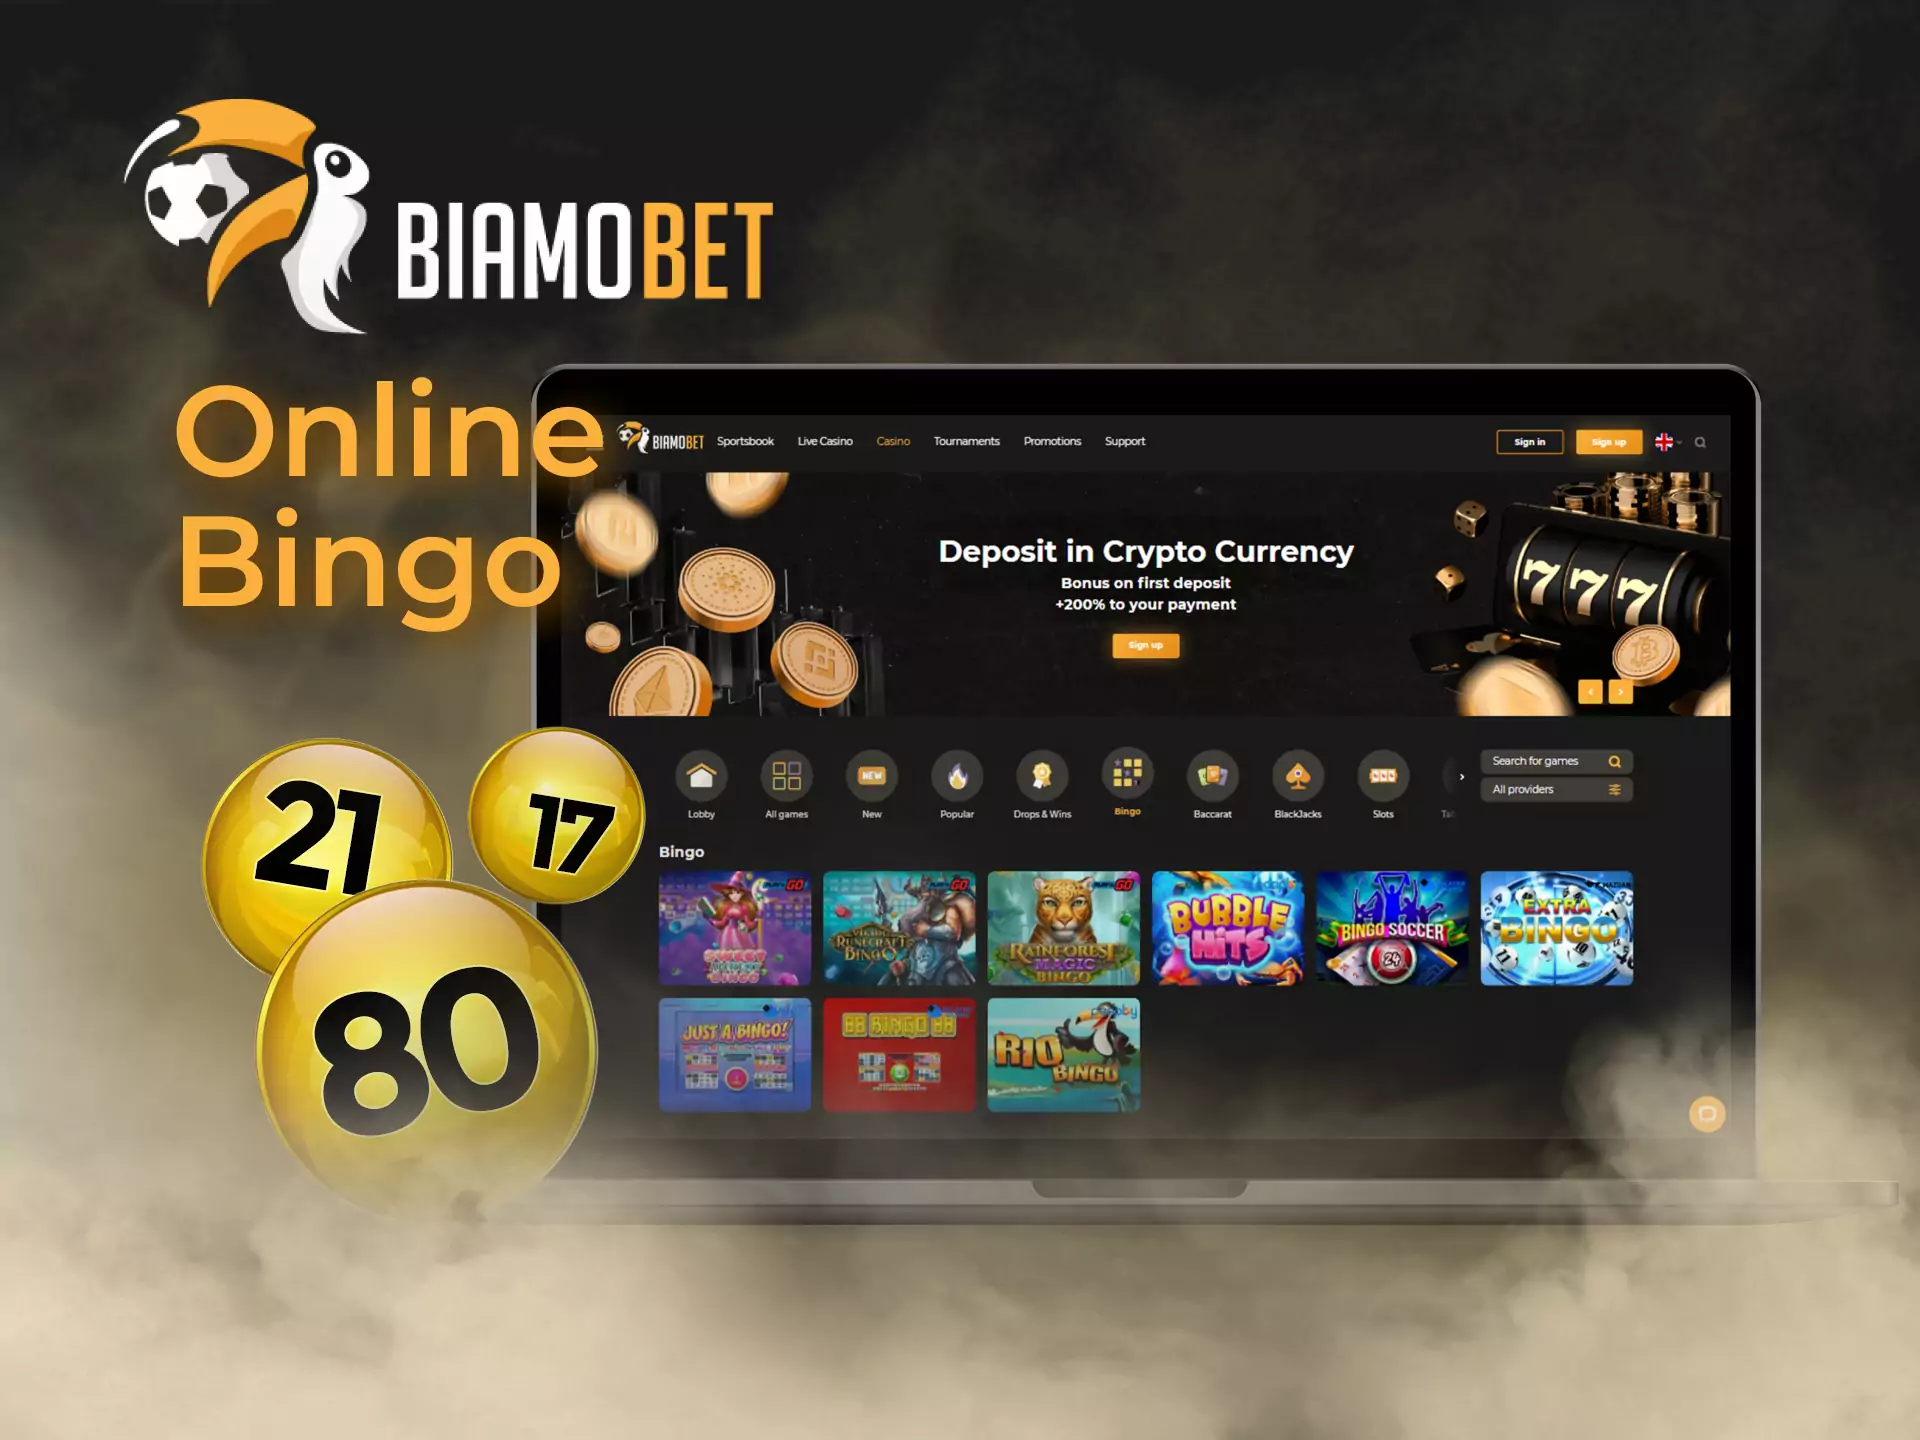 Test your fortune by playing Bingo games on Biamobet.